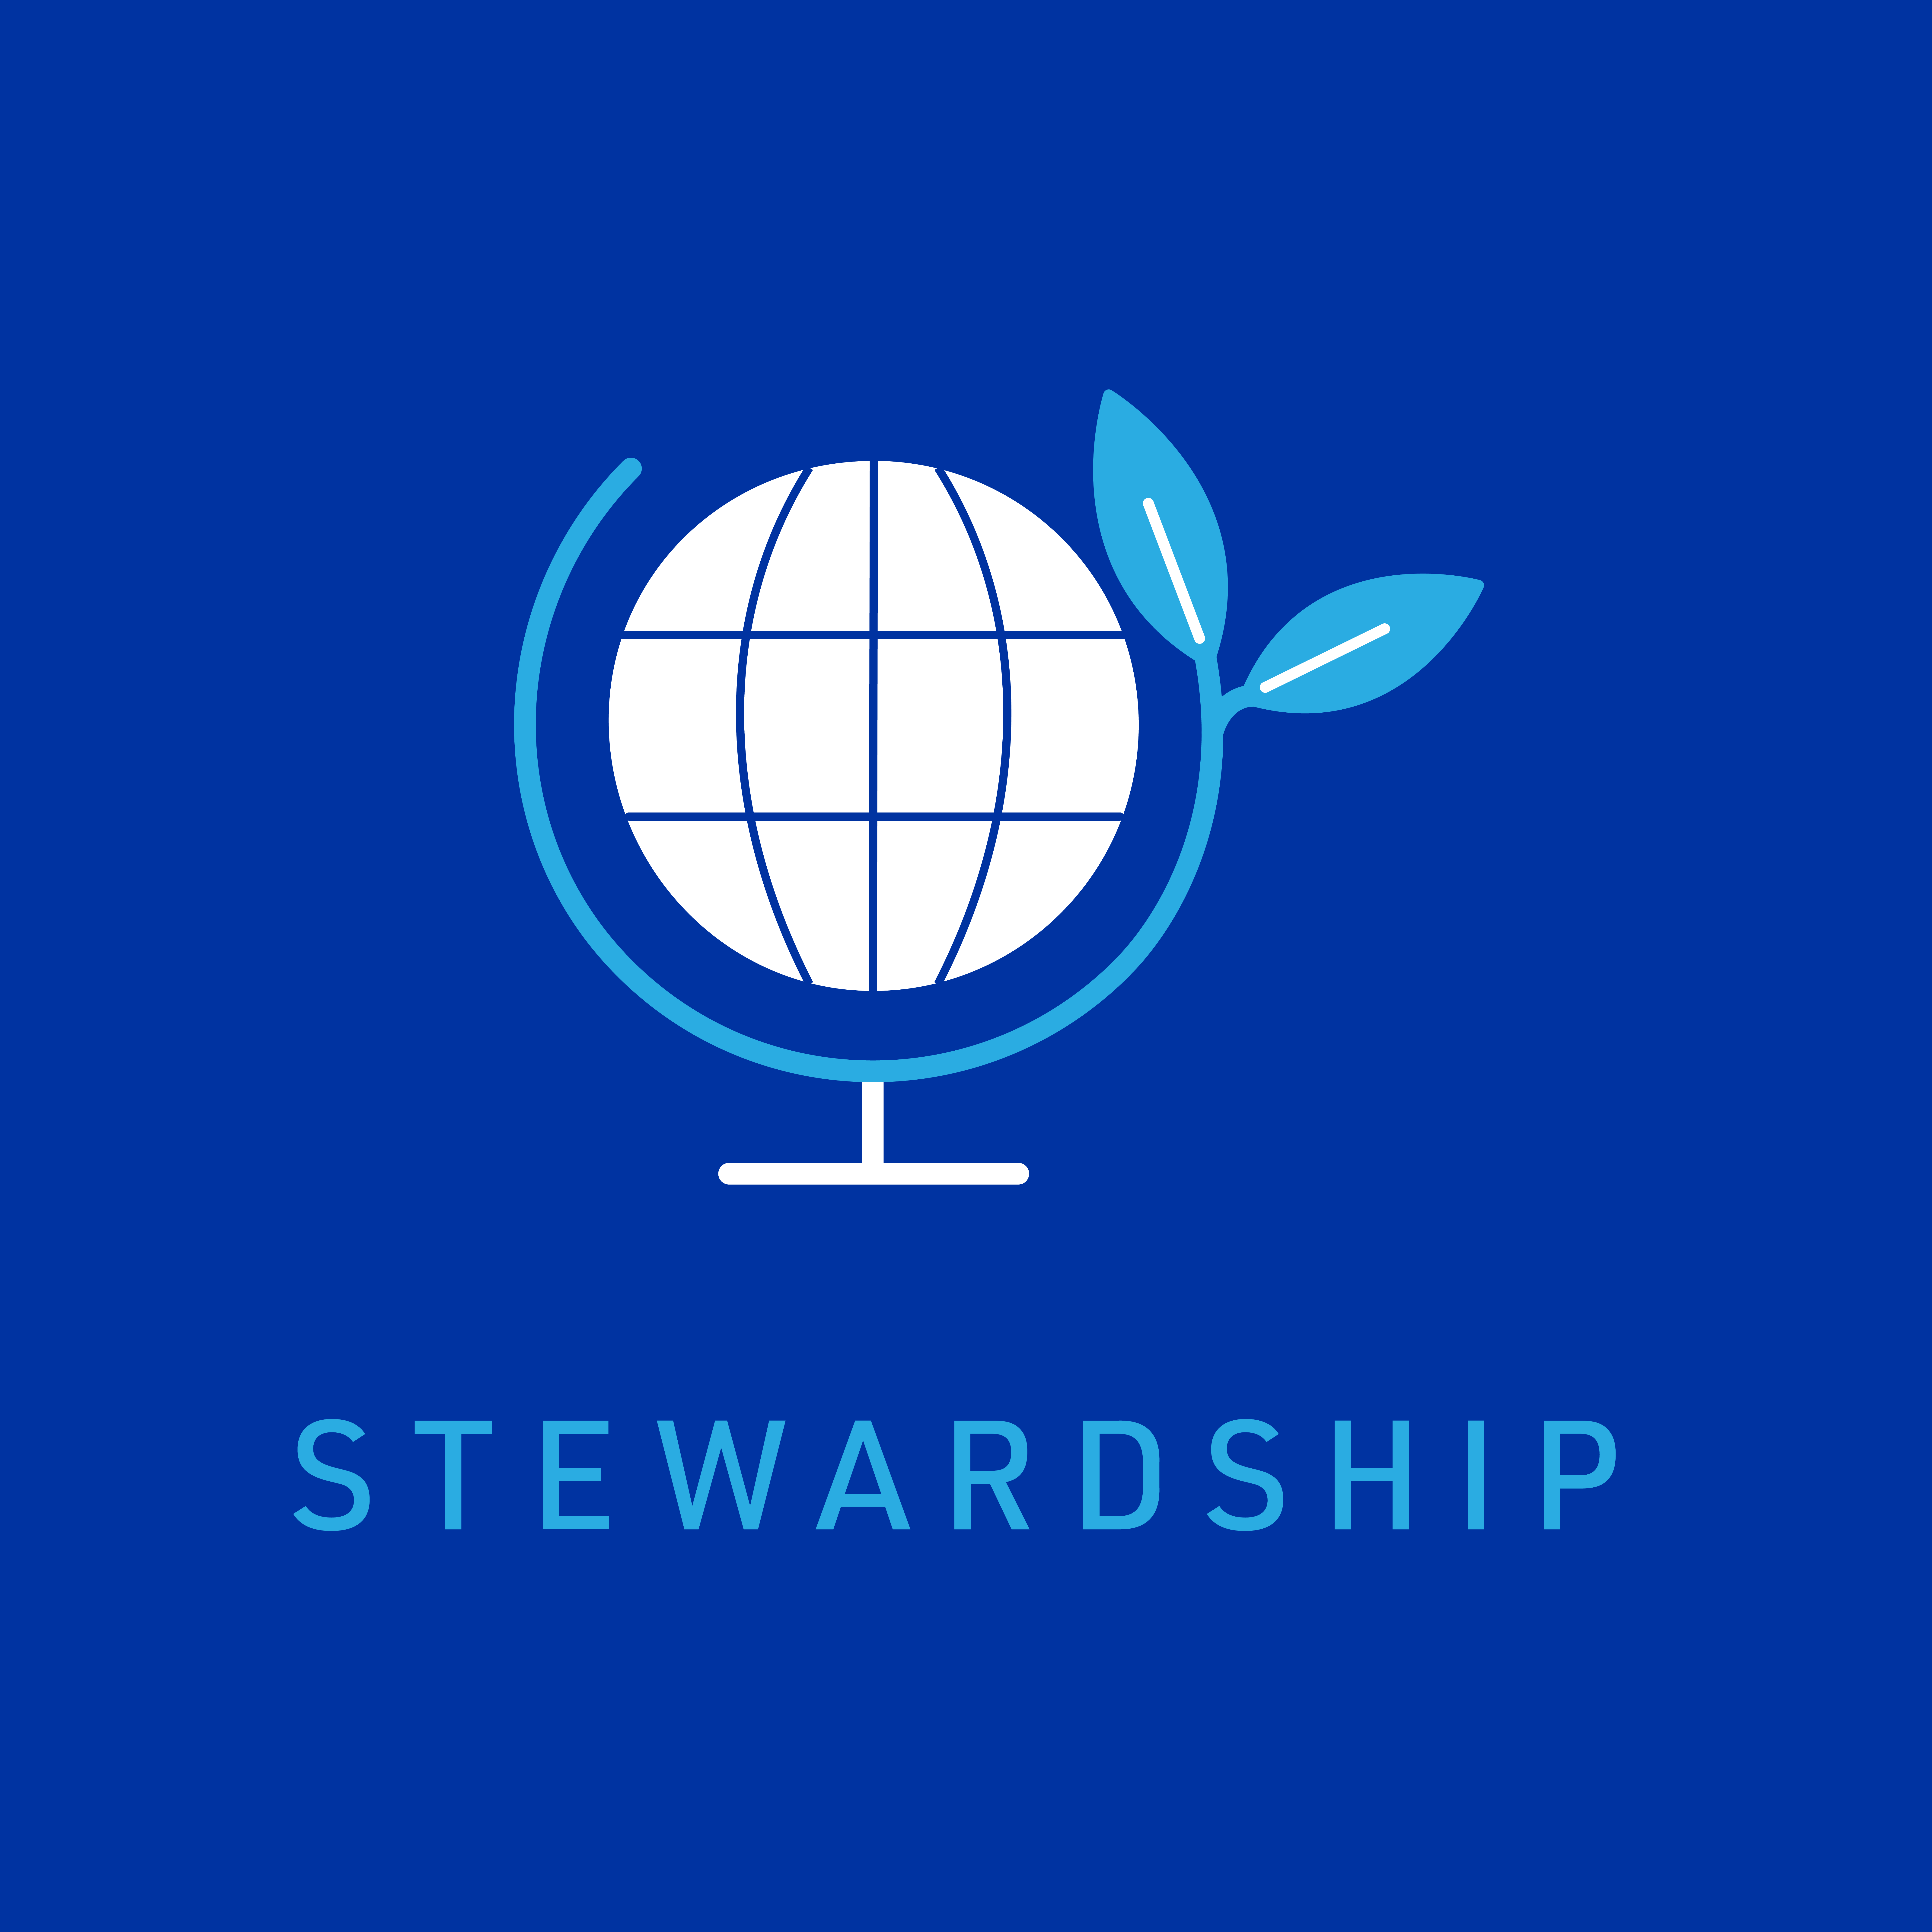 MiTek's guiding principle of stewardship - A square graphic of a globe with plant growth replacing the holder and encircling the planet